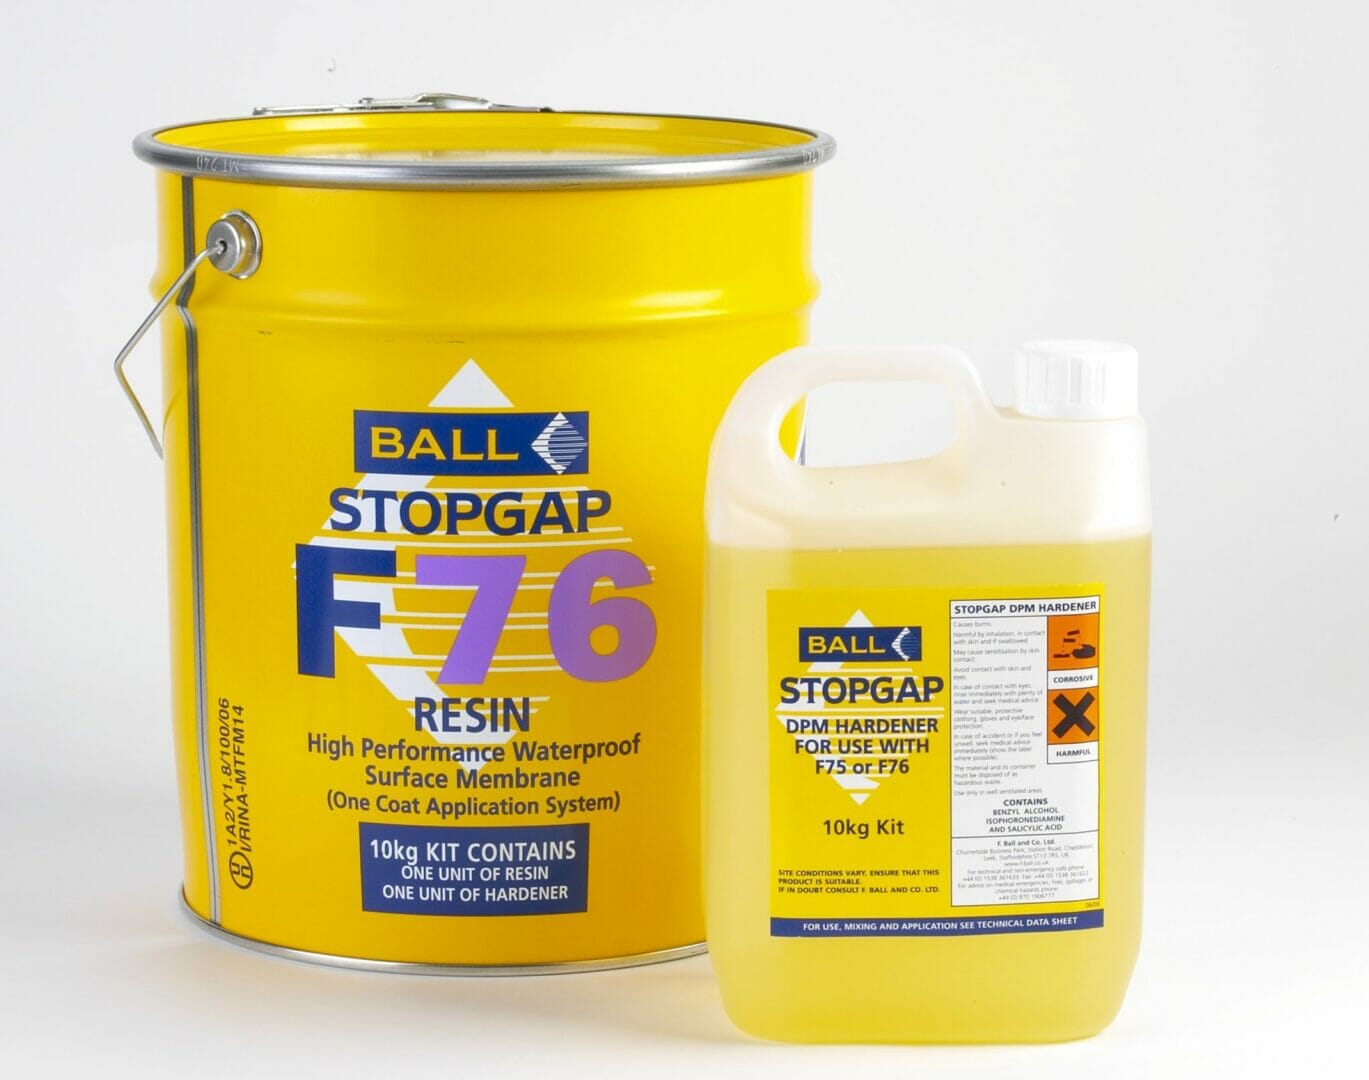 The ultimate Fast Track Solution for Damp or Contaminated Floors